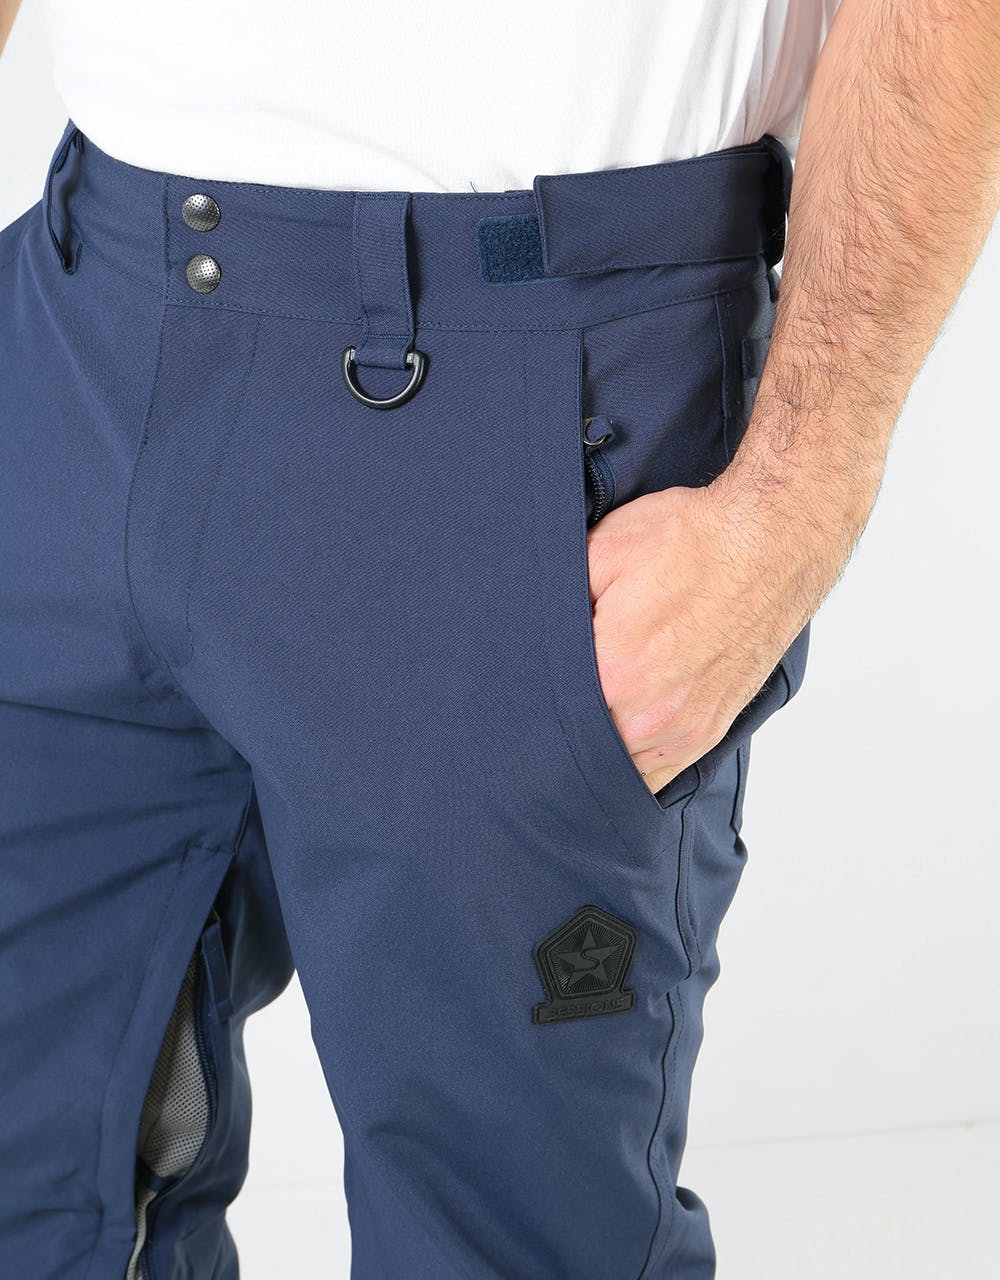 Sessions Hammer 2020 Snowboard Pants - Marriner